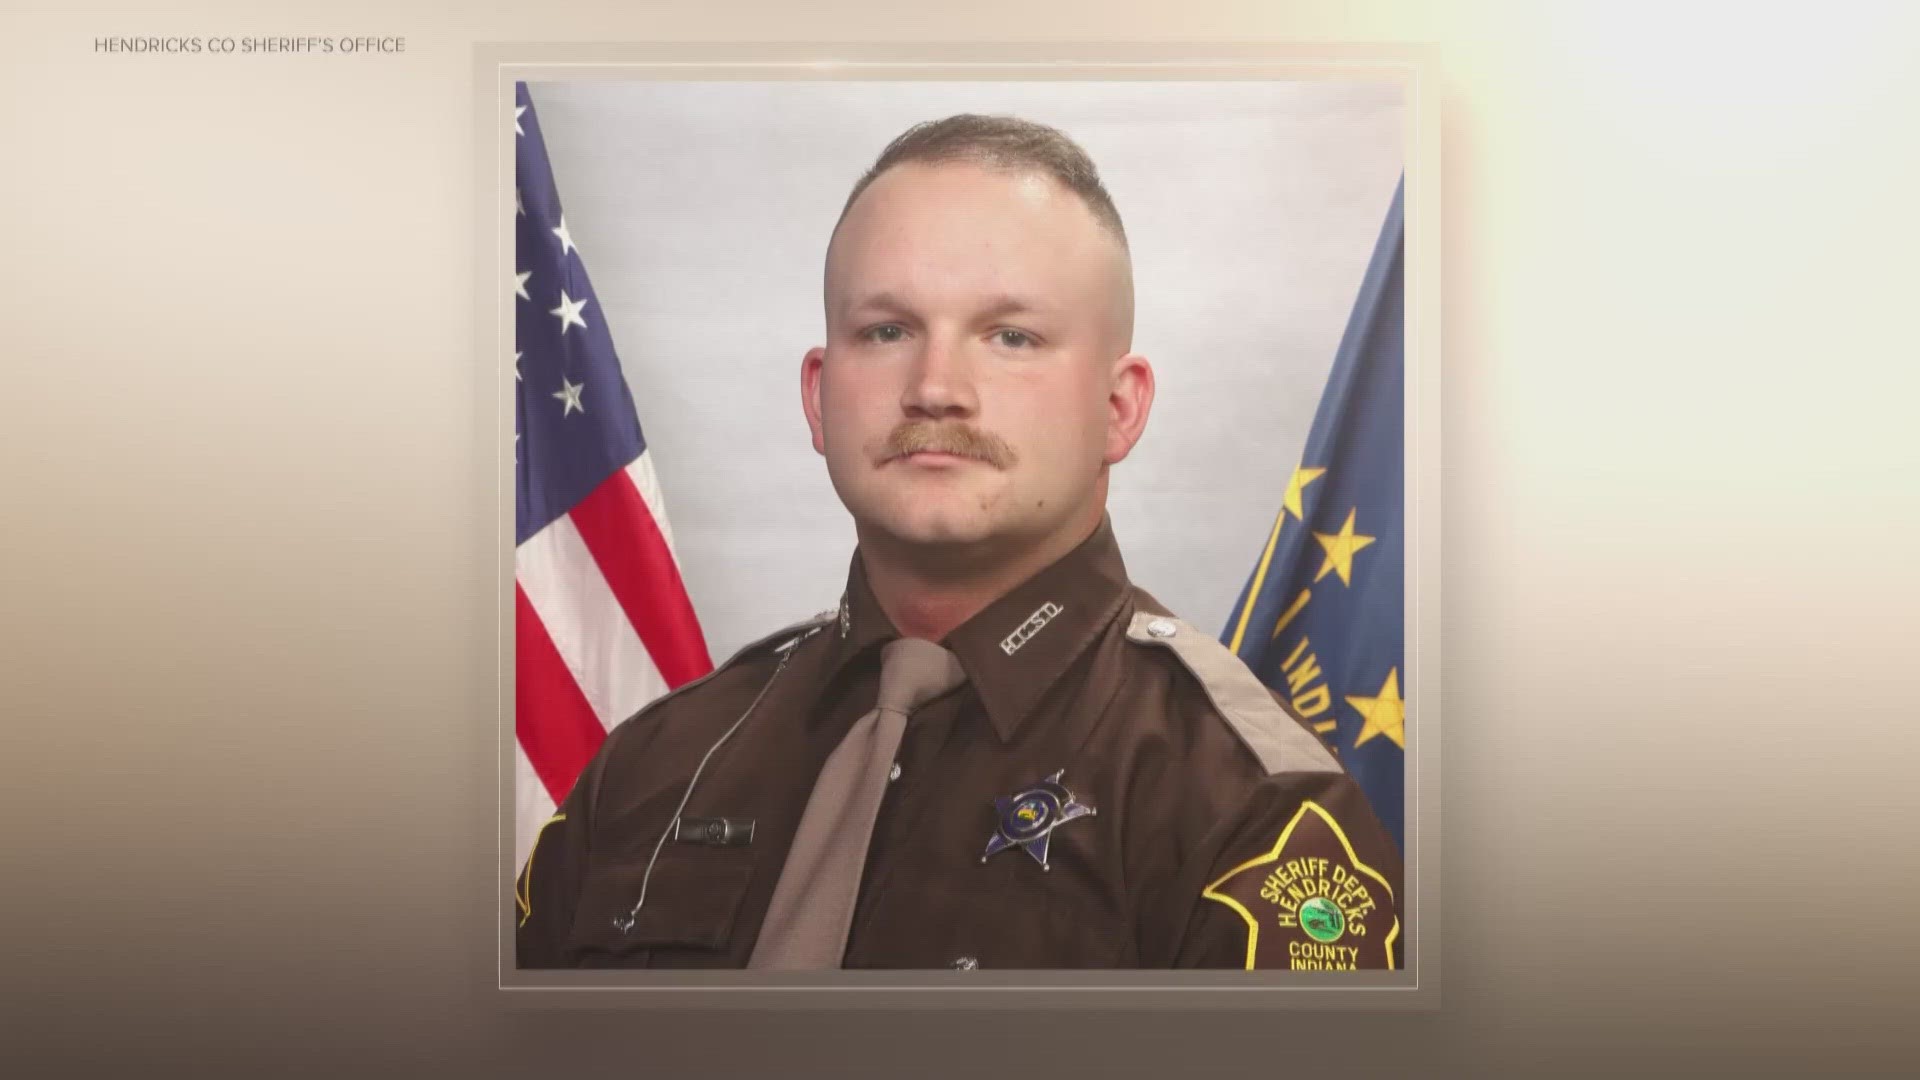 The Central Indiana Police Foundation set up an official donation site for Deputy Fislar.